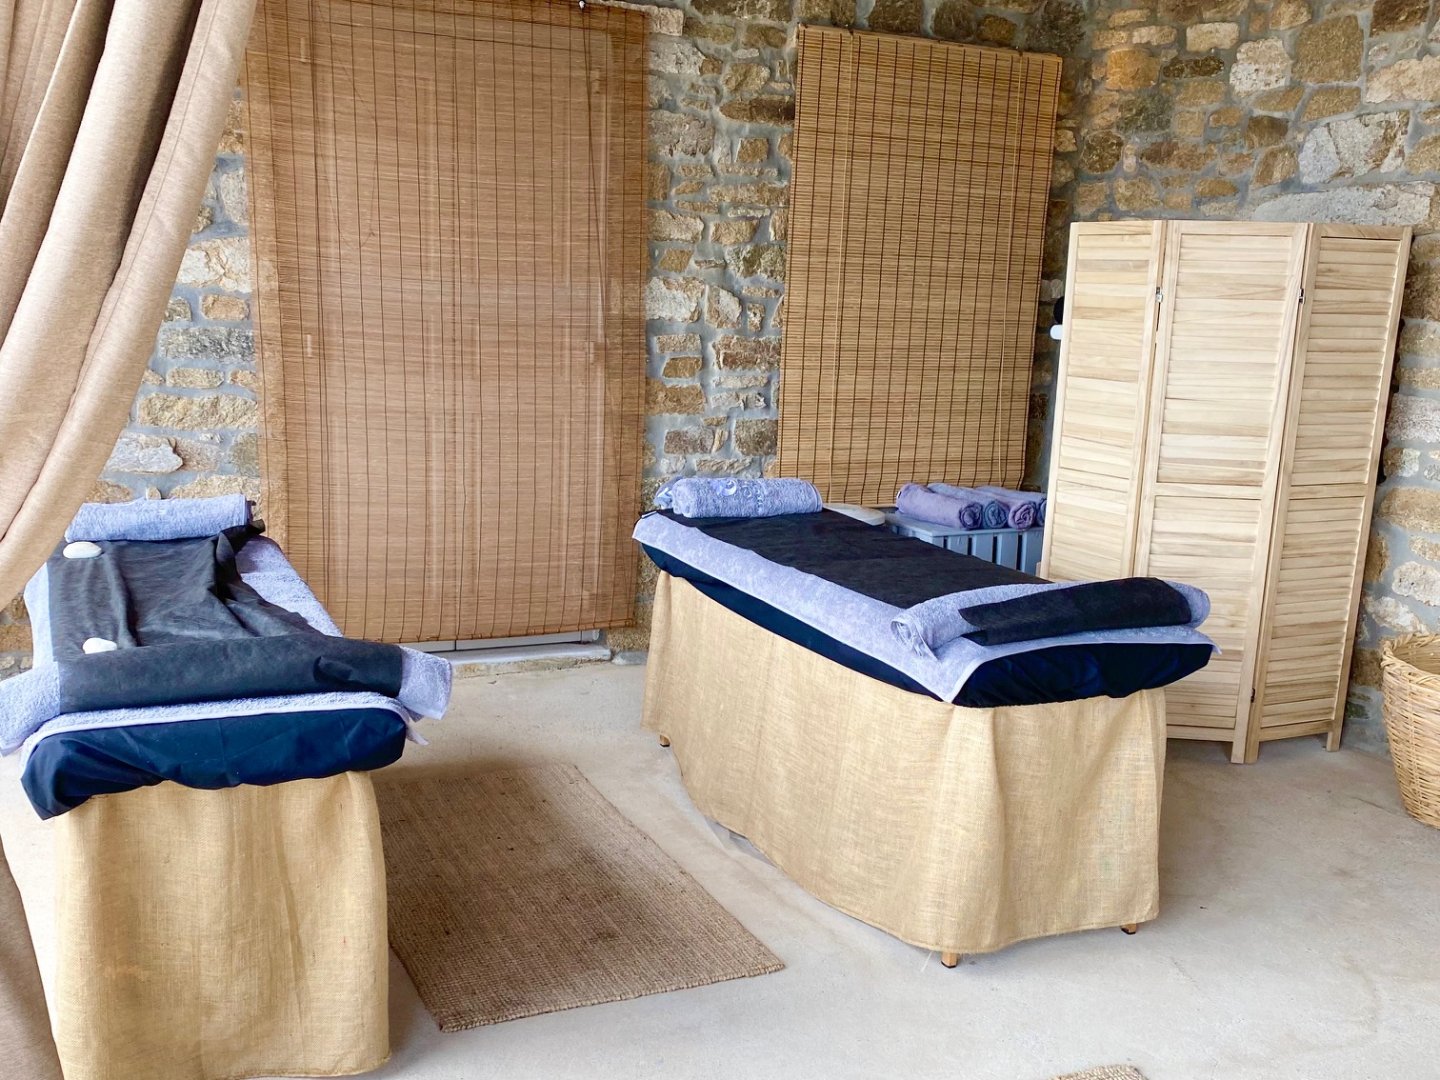 Outdoor massage area at spa with two massage couches set up with towels